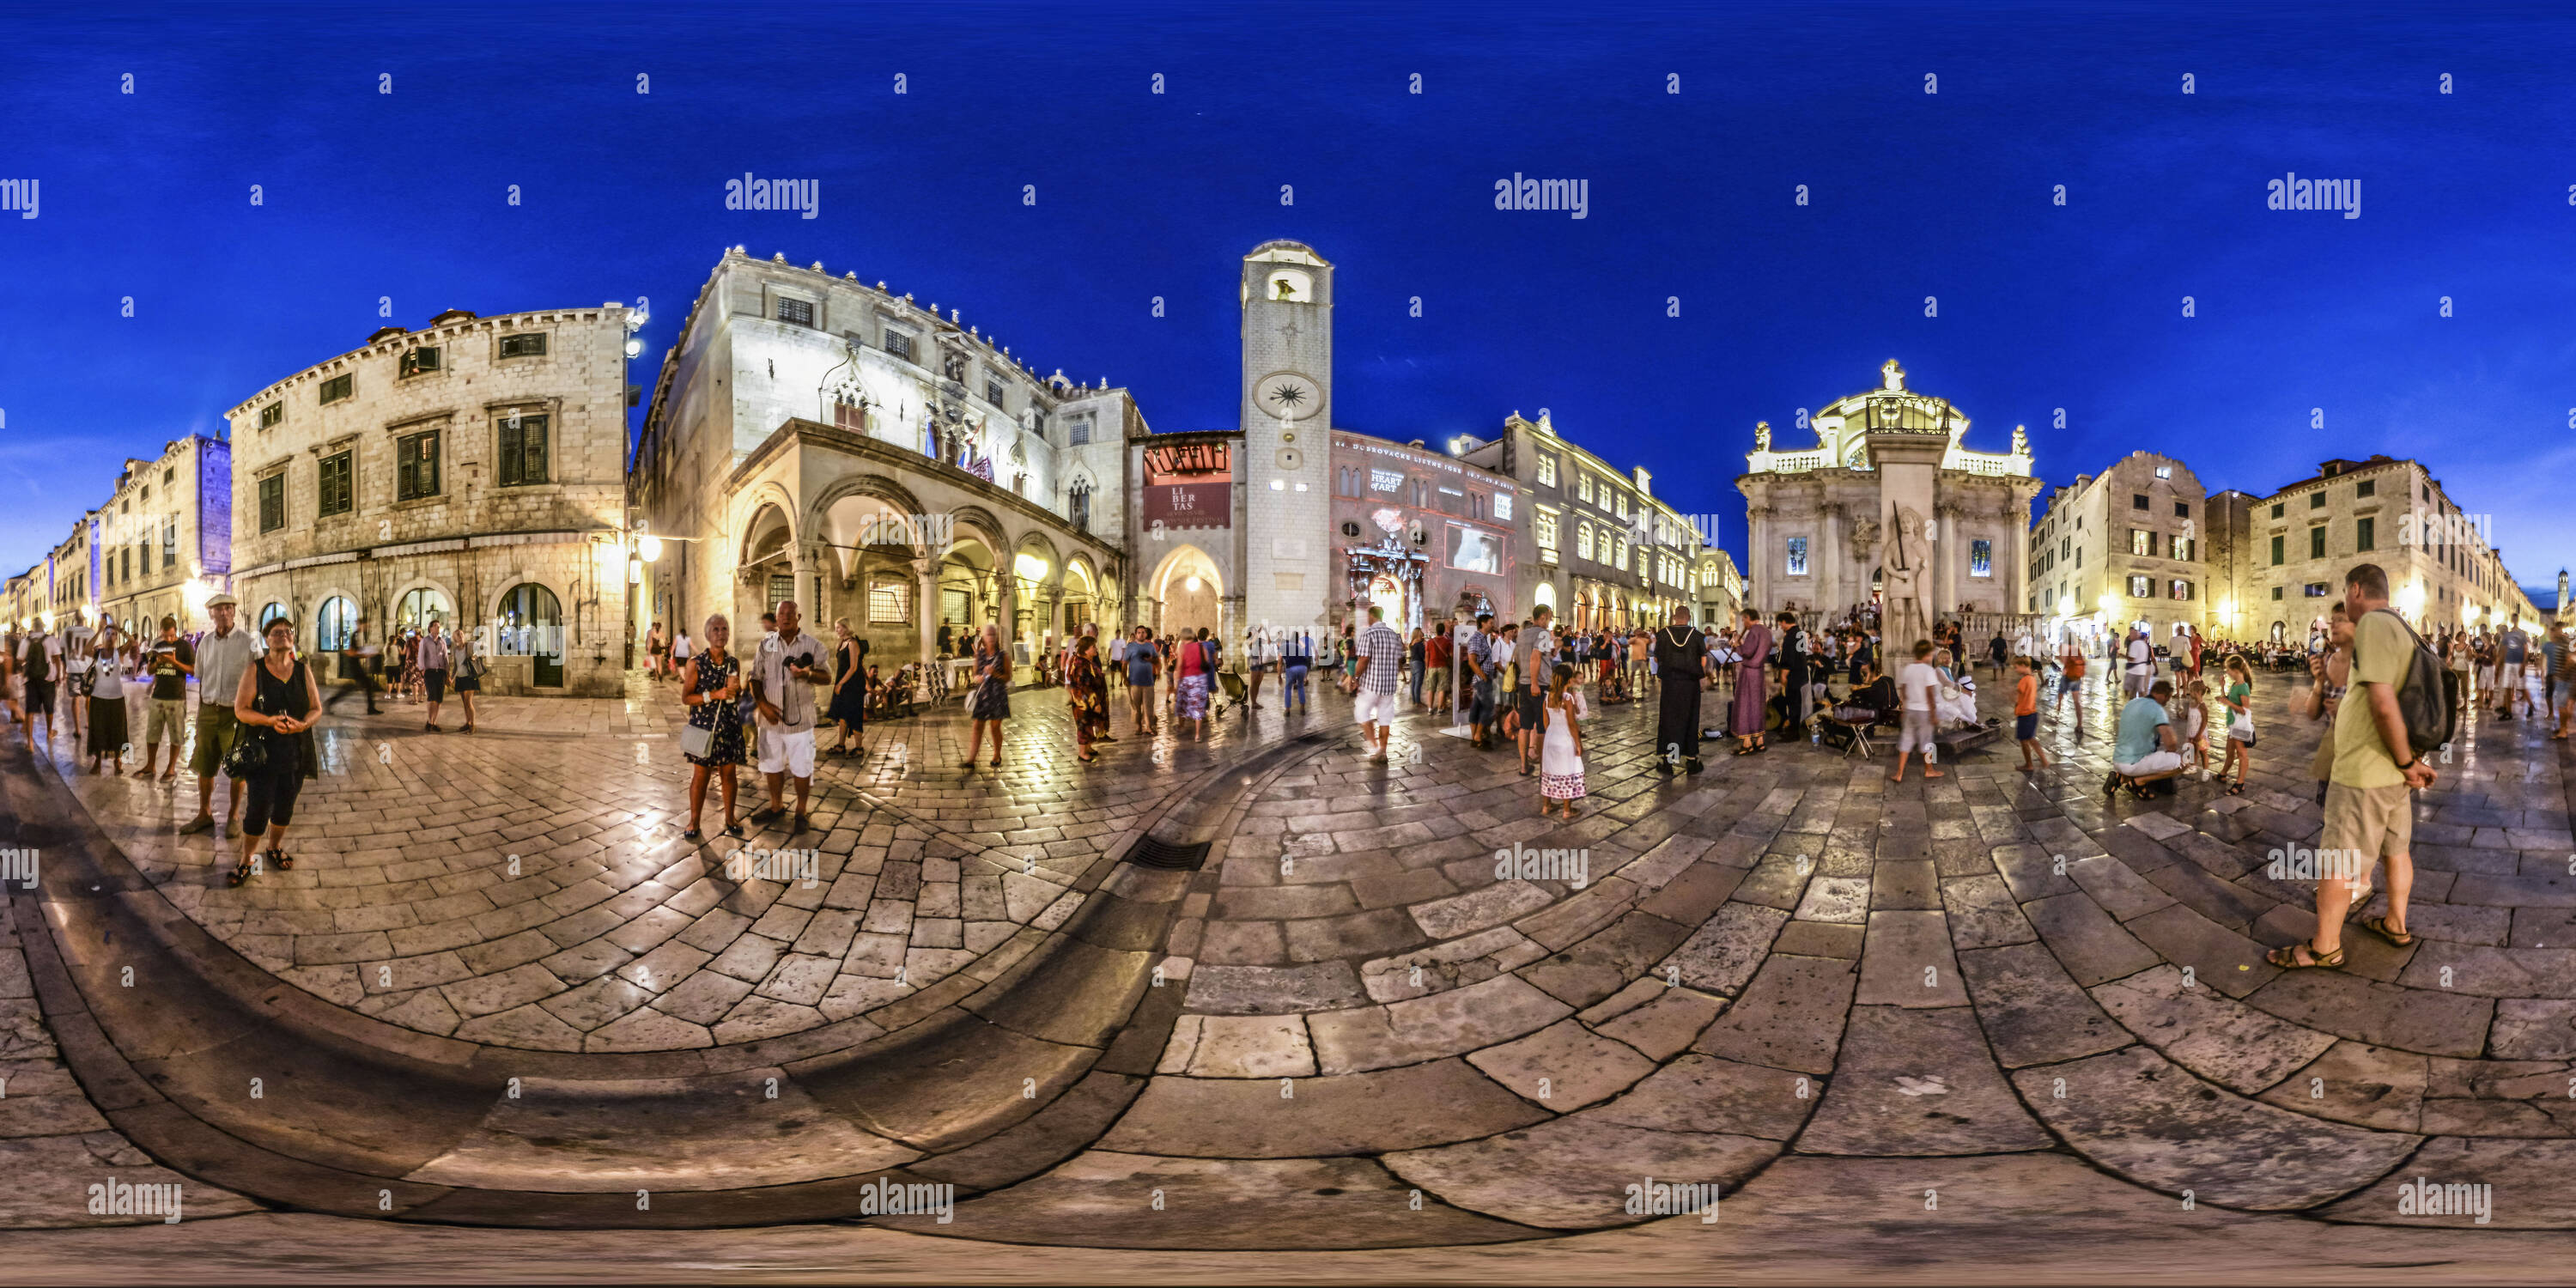 360 degree panoramic view of Dubrovnik by night